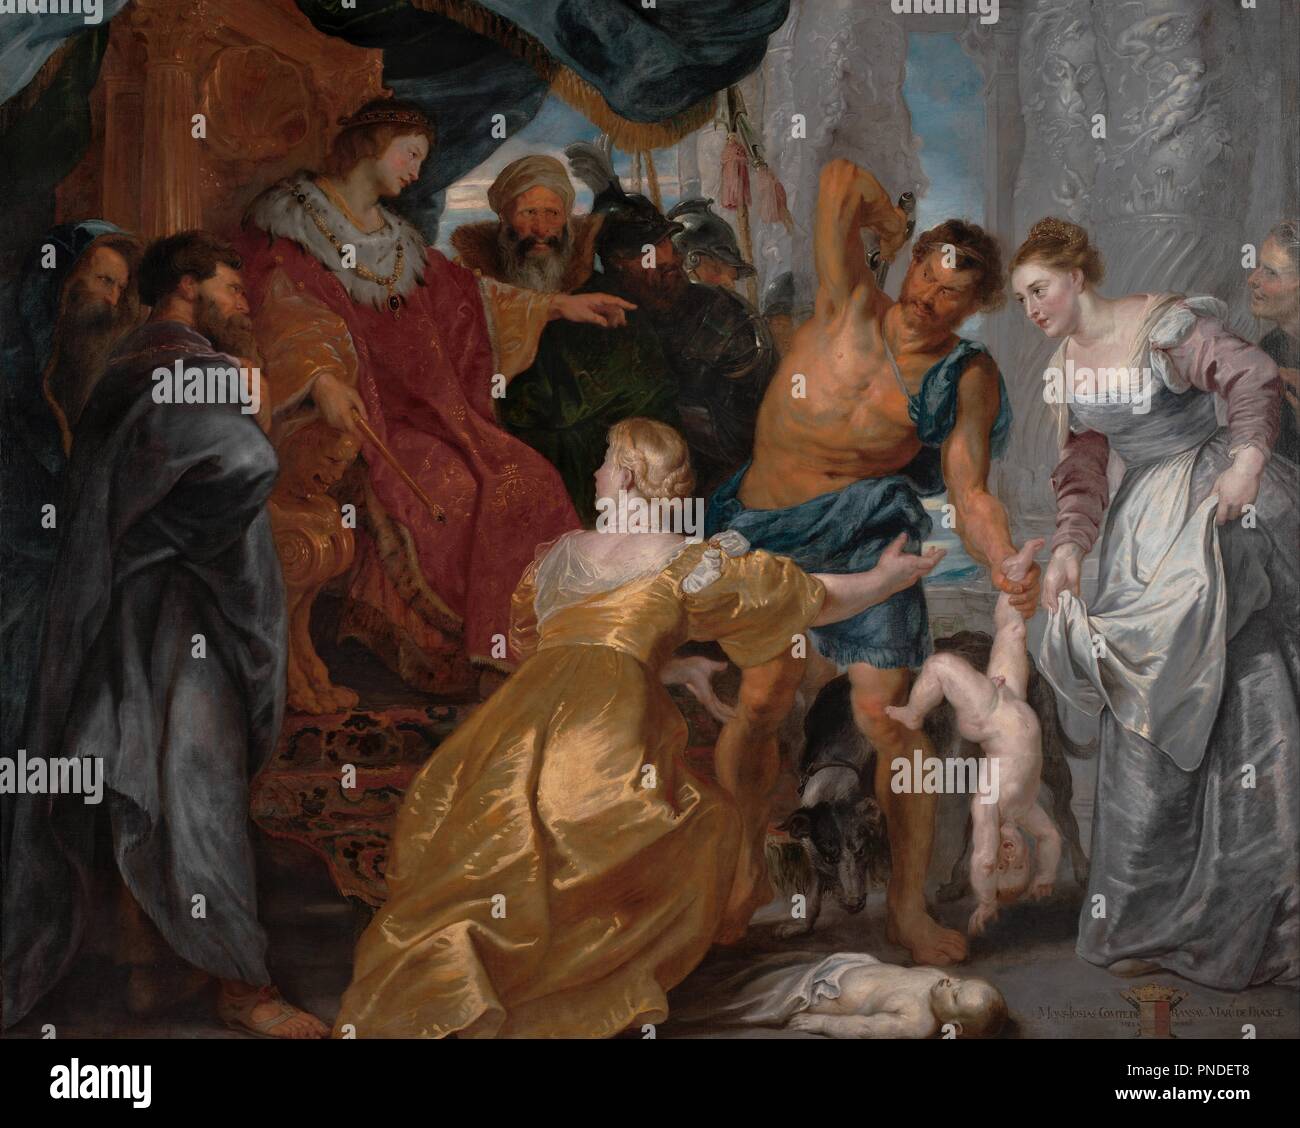 The Judgement of Solomon. Date/Period: Ca. 1617. Painting. Oil on canvas. Height: 2,340 mm (92.12 in); Width: 3,030 mm (119.29 in). Author: PETER PAUL RUBENS. Rubens, Pieter Paul. WILHELM FREDDIE. Stock Photo